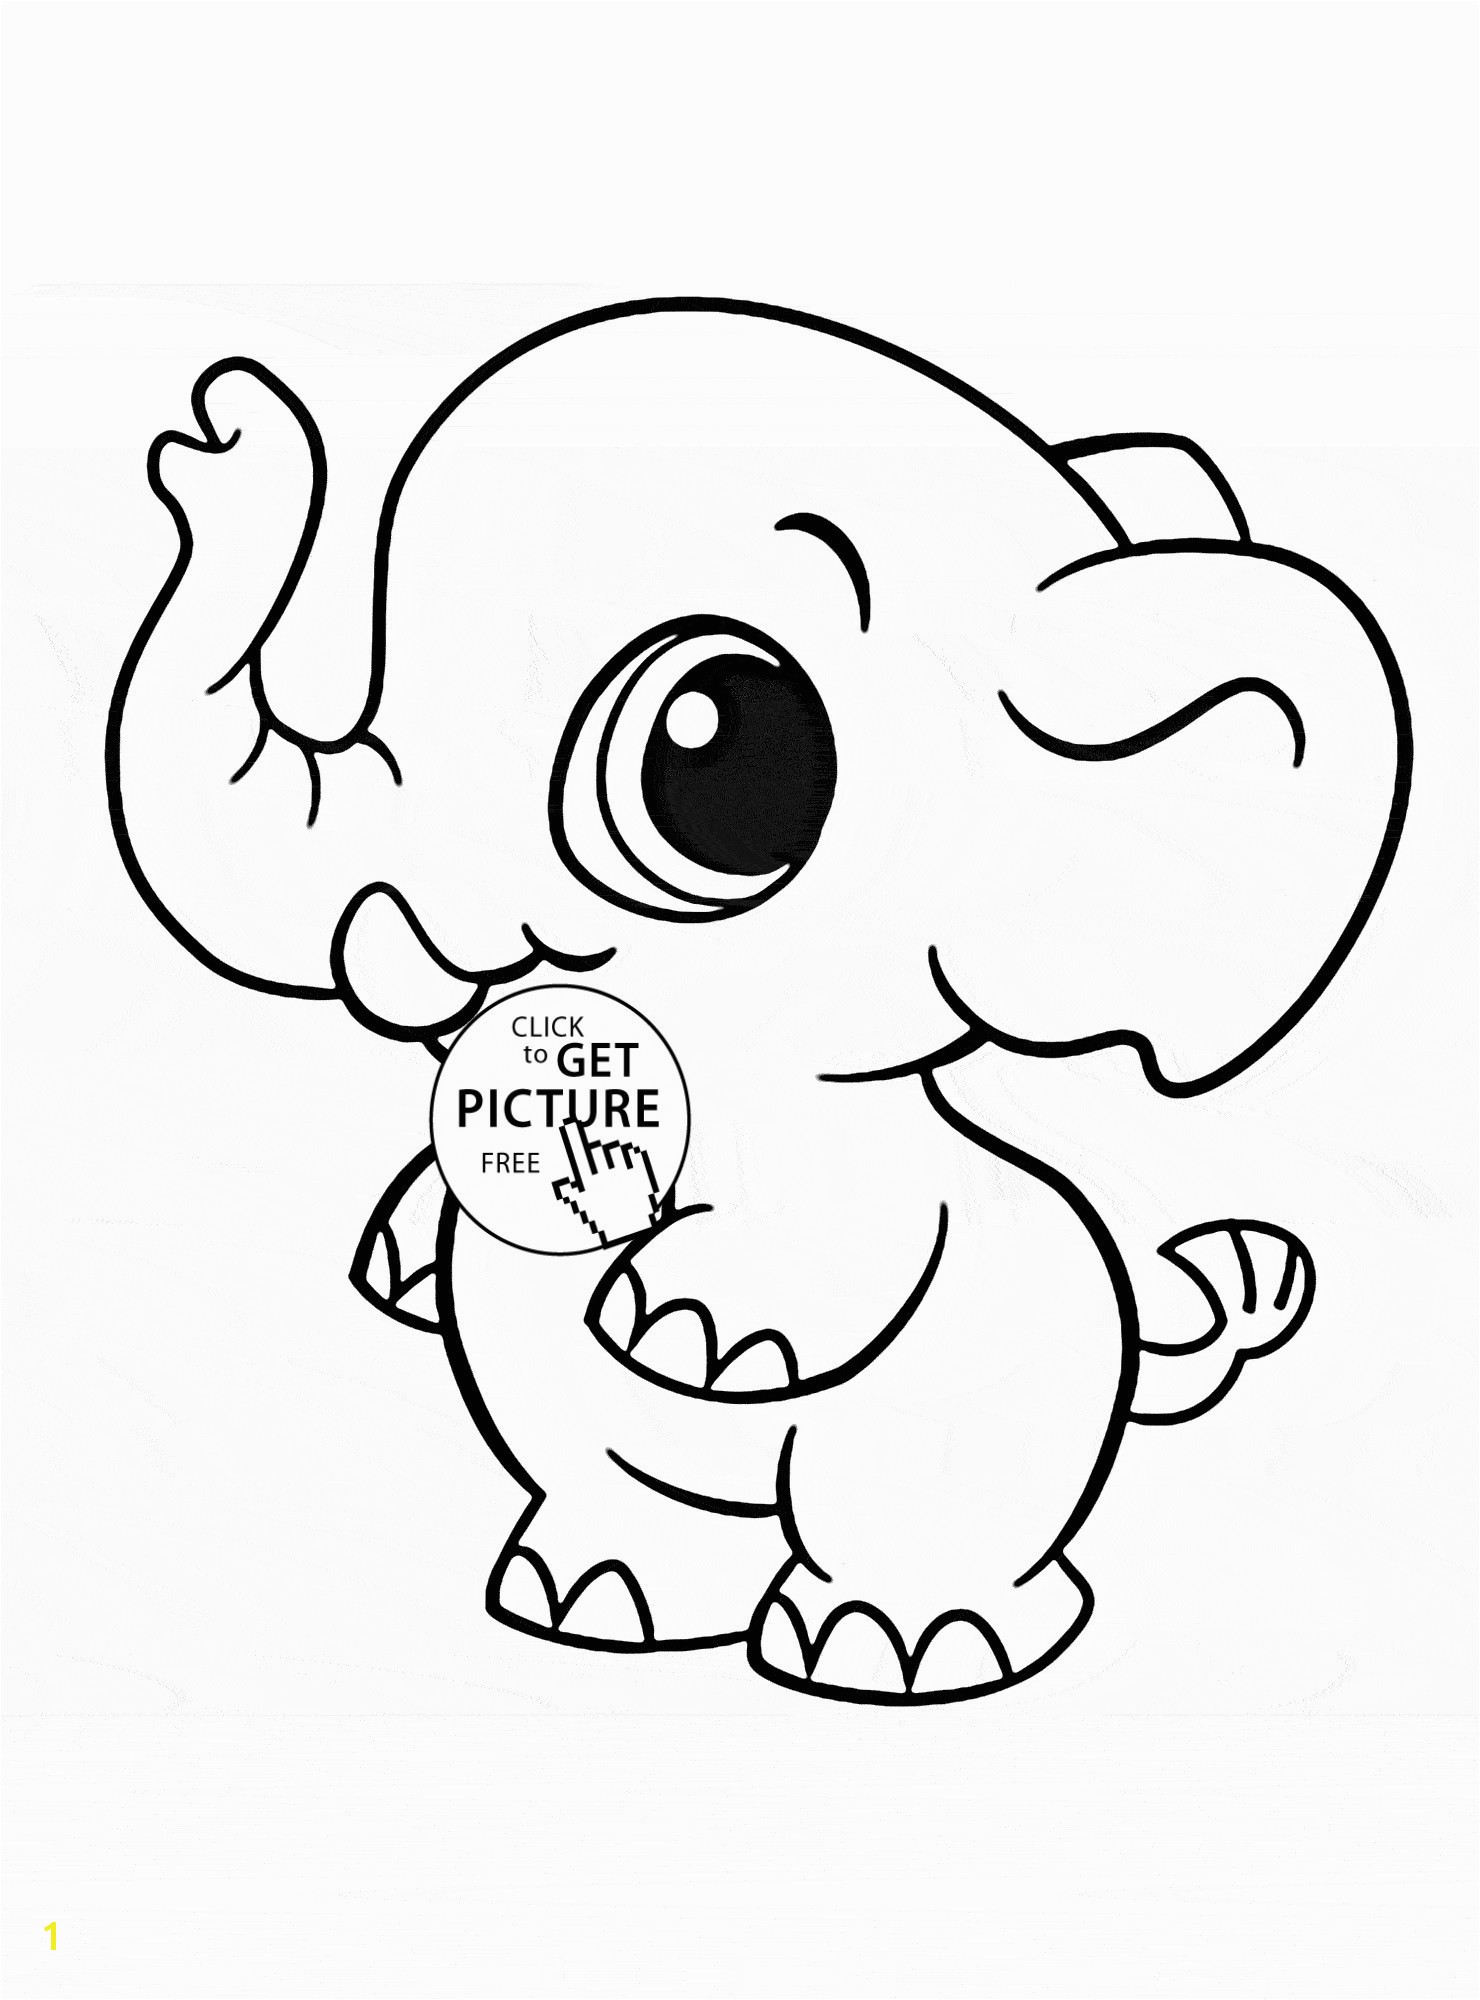 Coloring Pages Of Cute Babies Cute Baby Animal Coloring Pages Fresh Media Cache Ec0 Pinimg